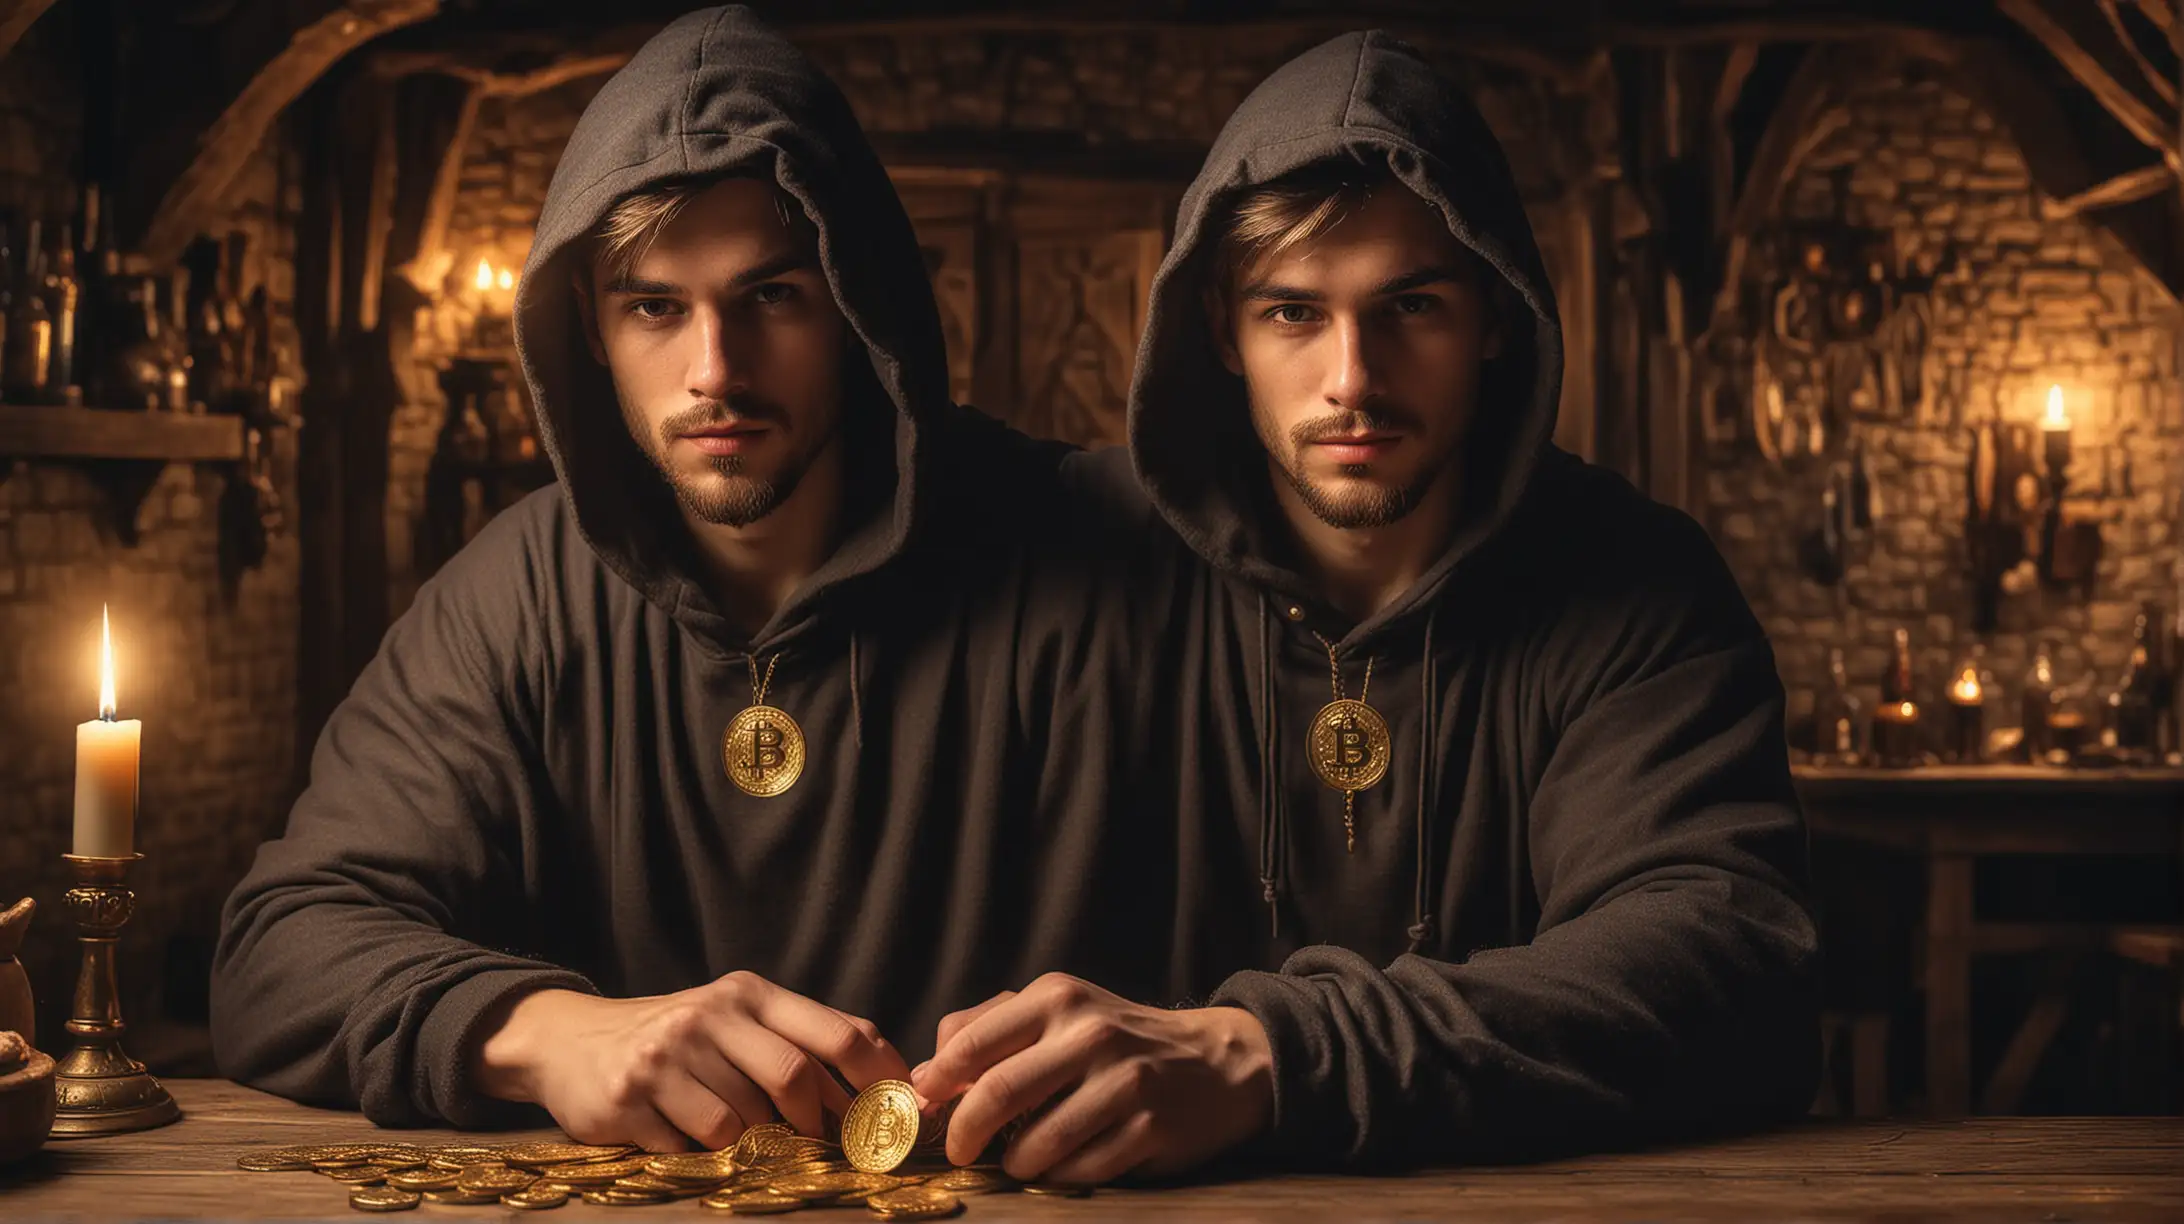 Handsome 21 year old male wearing a hooded cloak in a medieval tavern, muscular chest under the hoodie, betting gold Bitcoins in card games, short beard, mysterious in a detailed fantasy style with bitcoins guldens, golden medals on the chest visible in the candle light